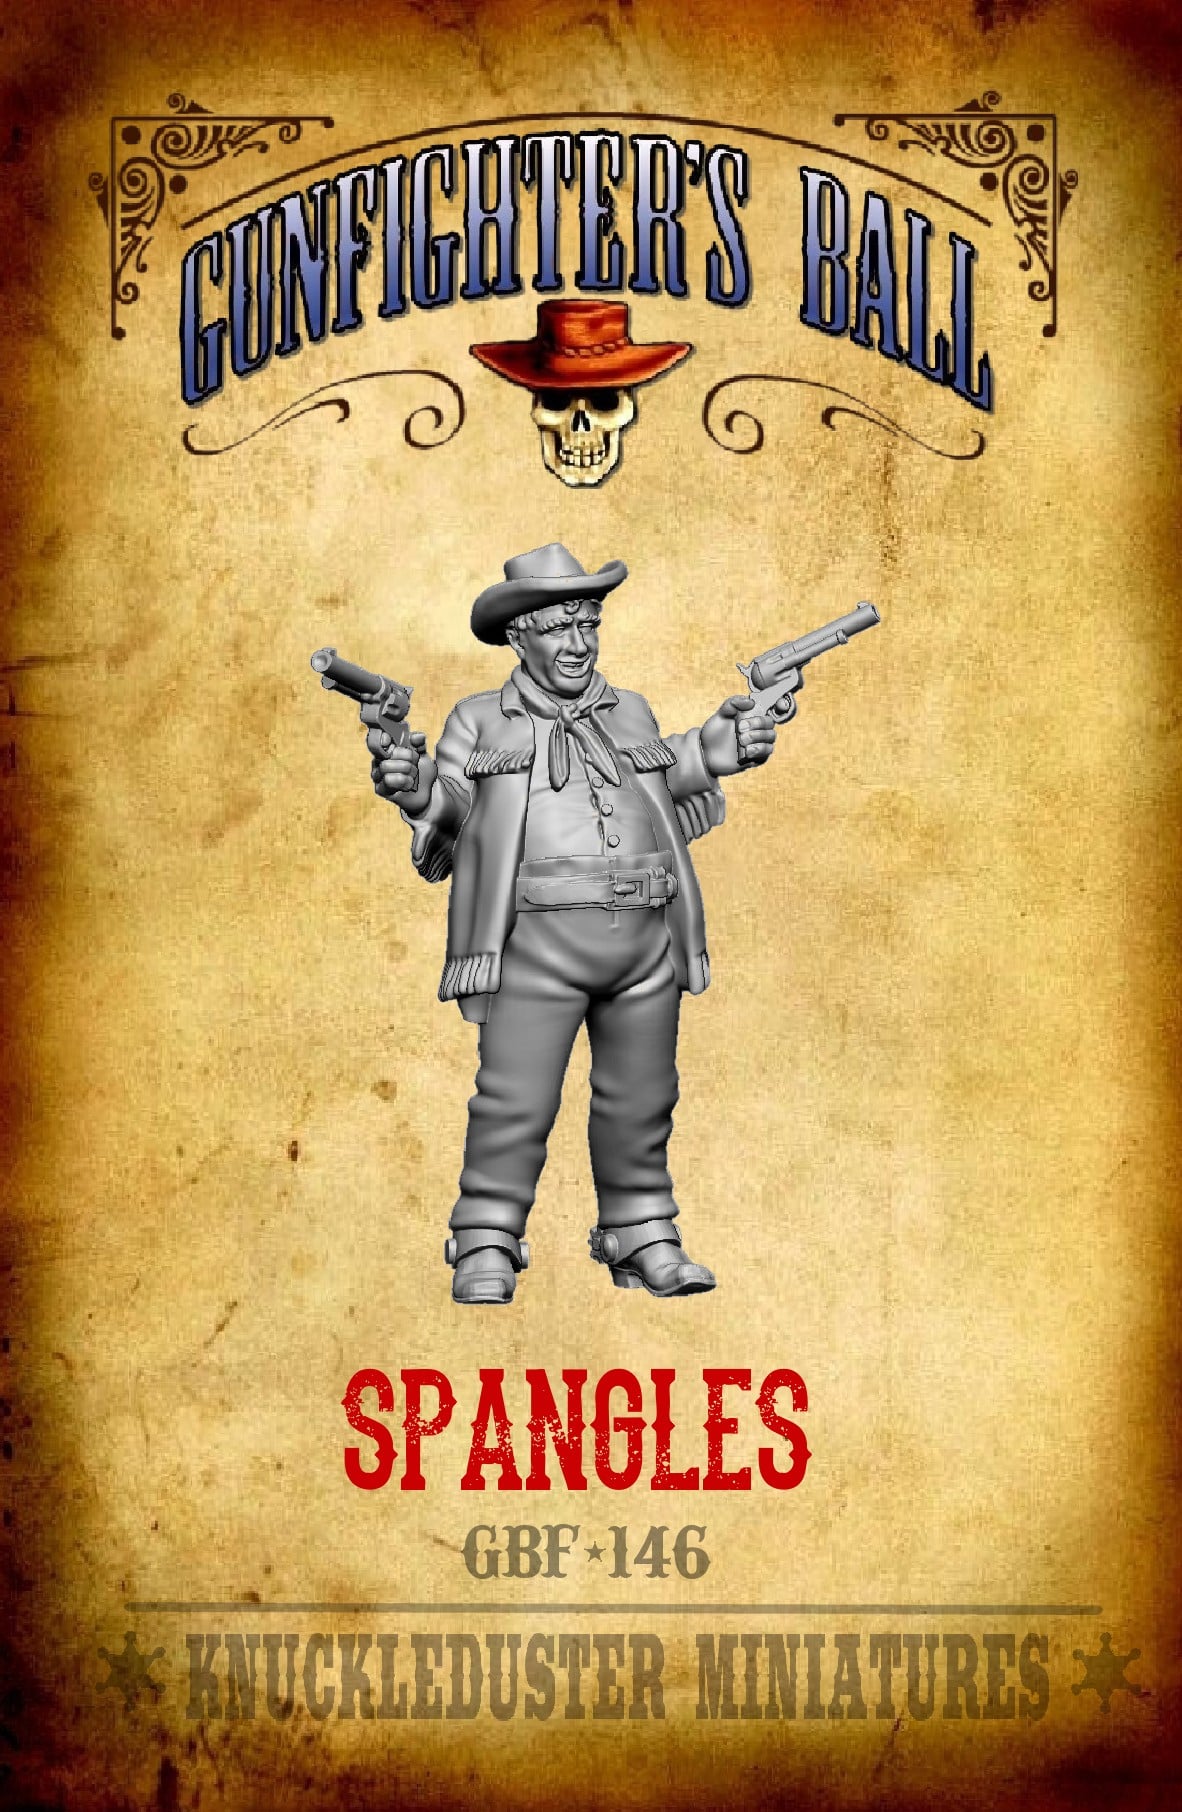 Spangles - Gunfighters Ball